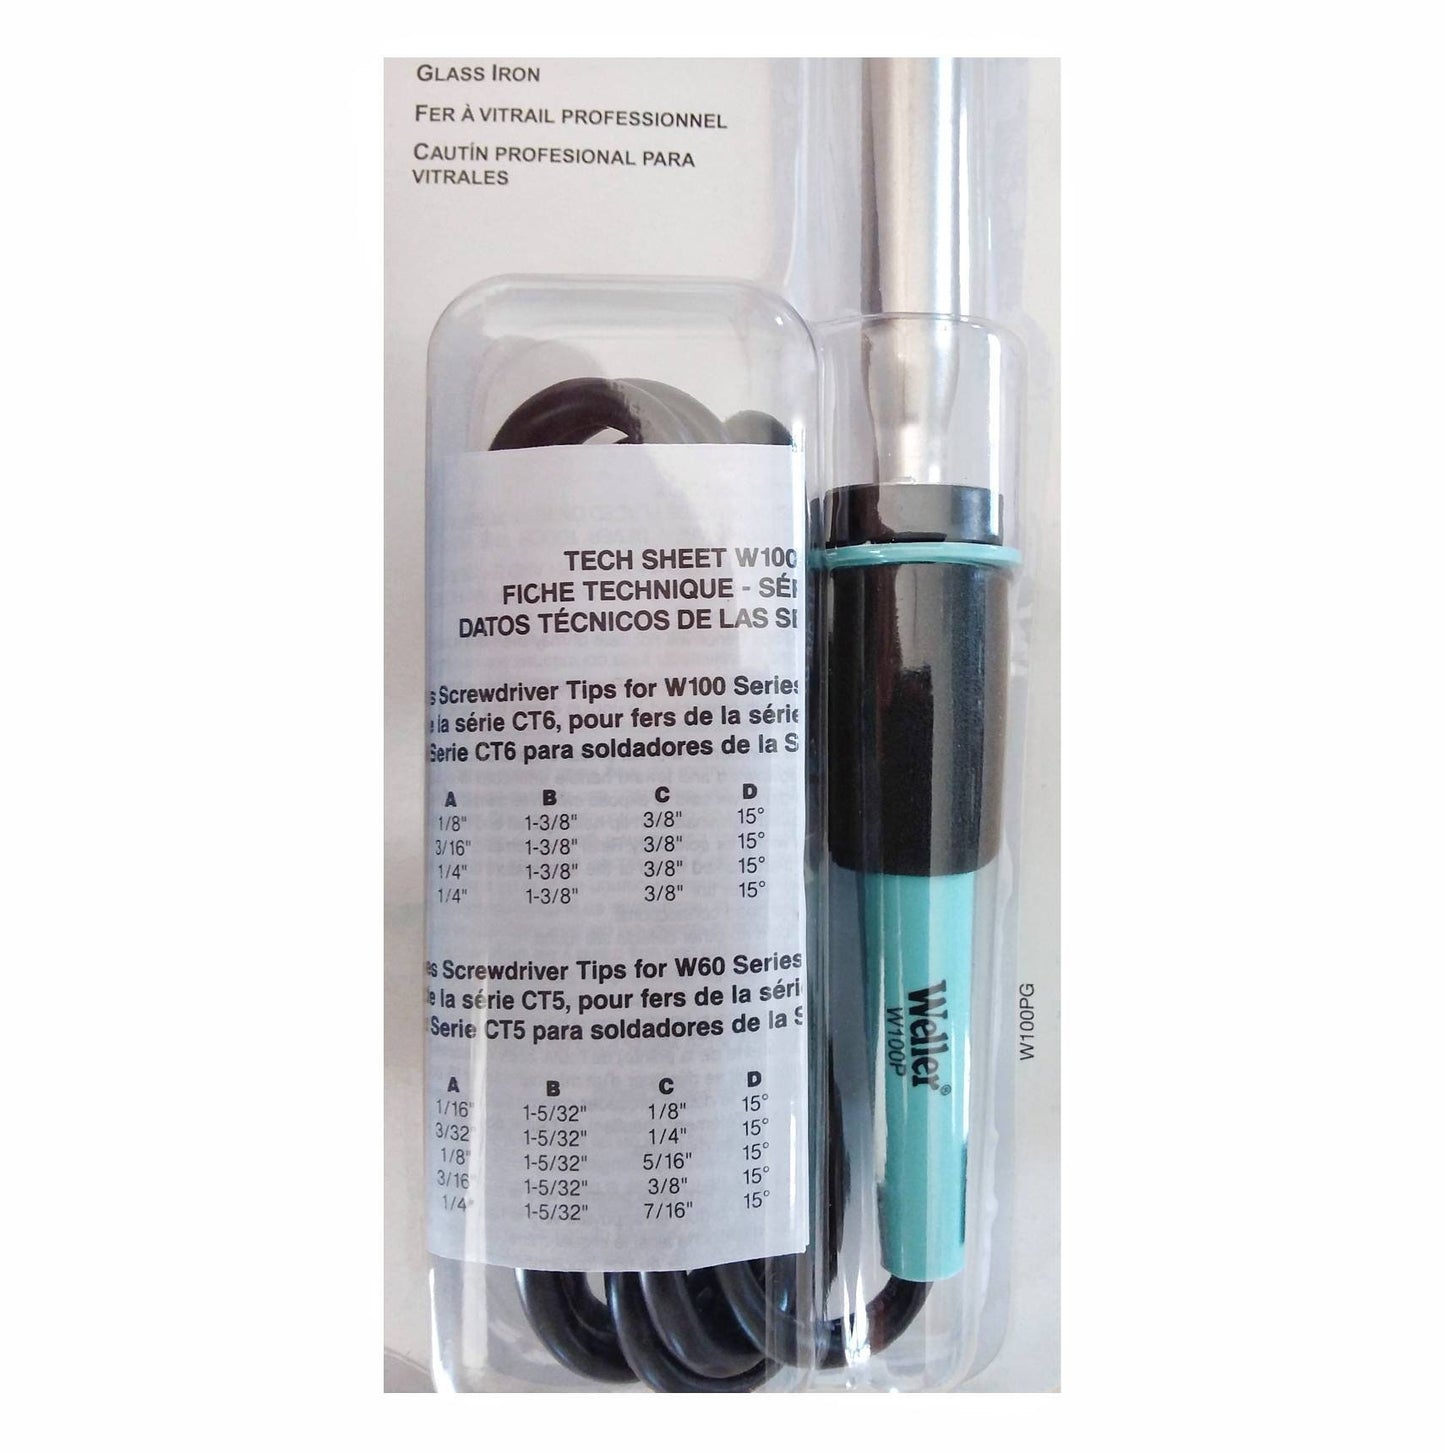 Soldering Iron for stained glass jewelry, wire or metal art Weller built-in temperature control with 3/8" tip. Free shipping.